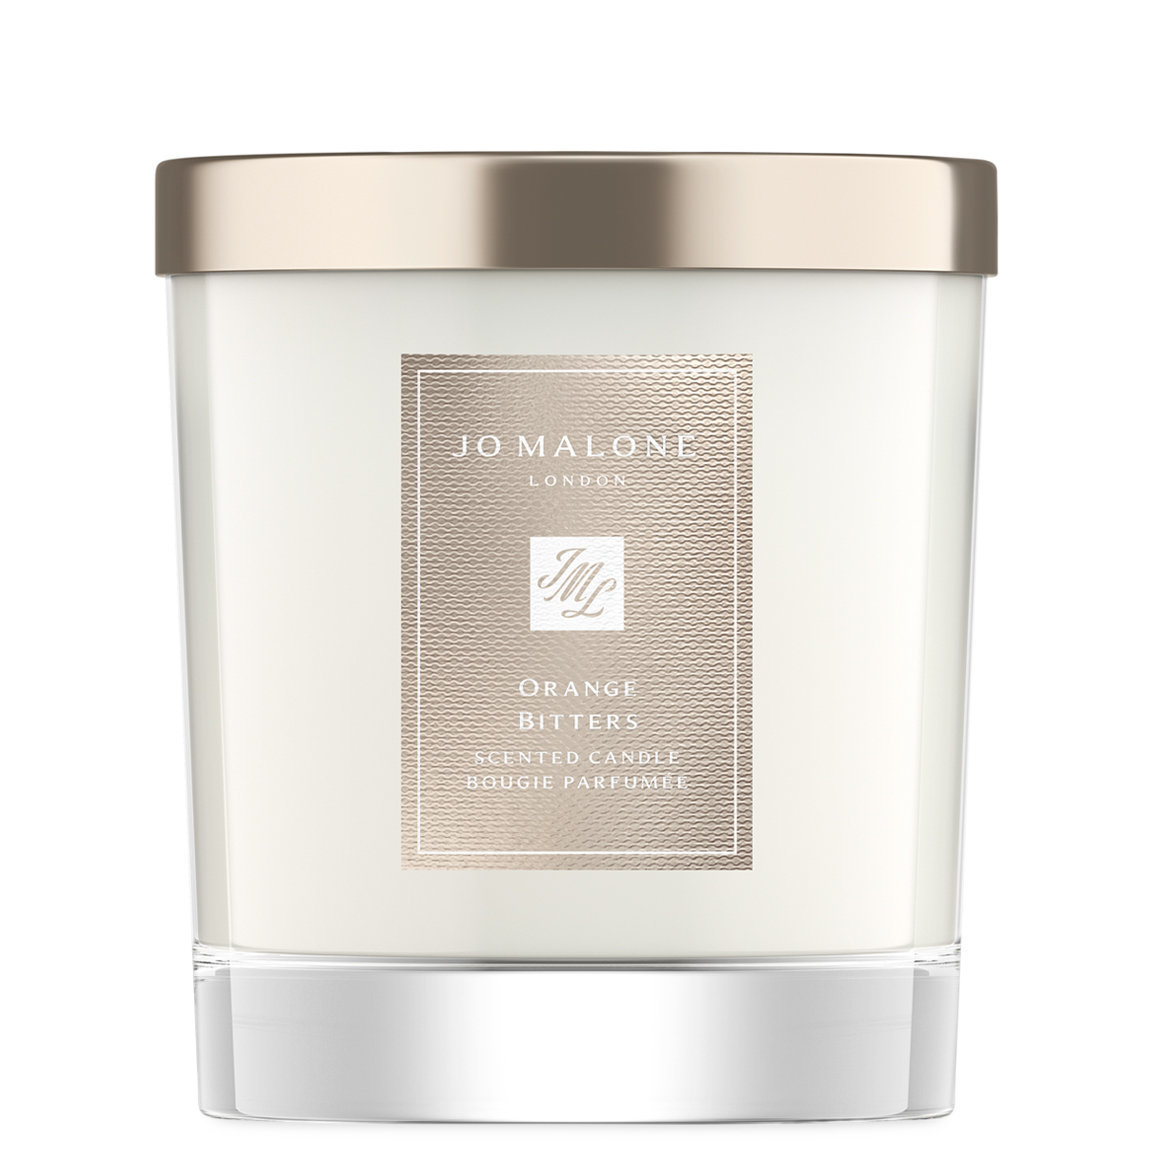 Jo Malone London Orange Bitters Home Candle alternative view 1 - product swatch.